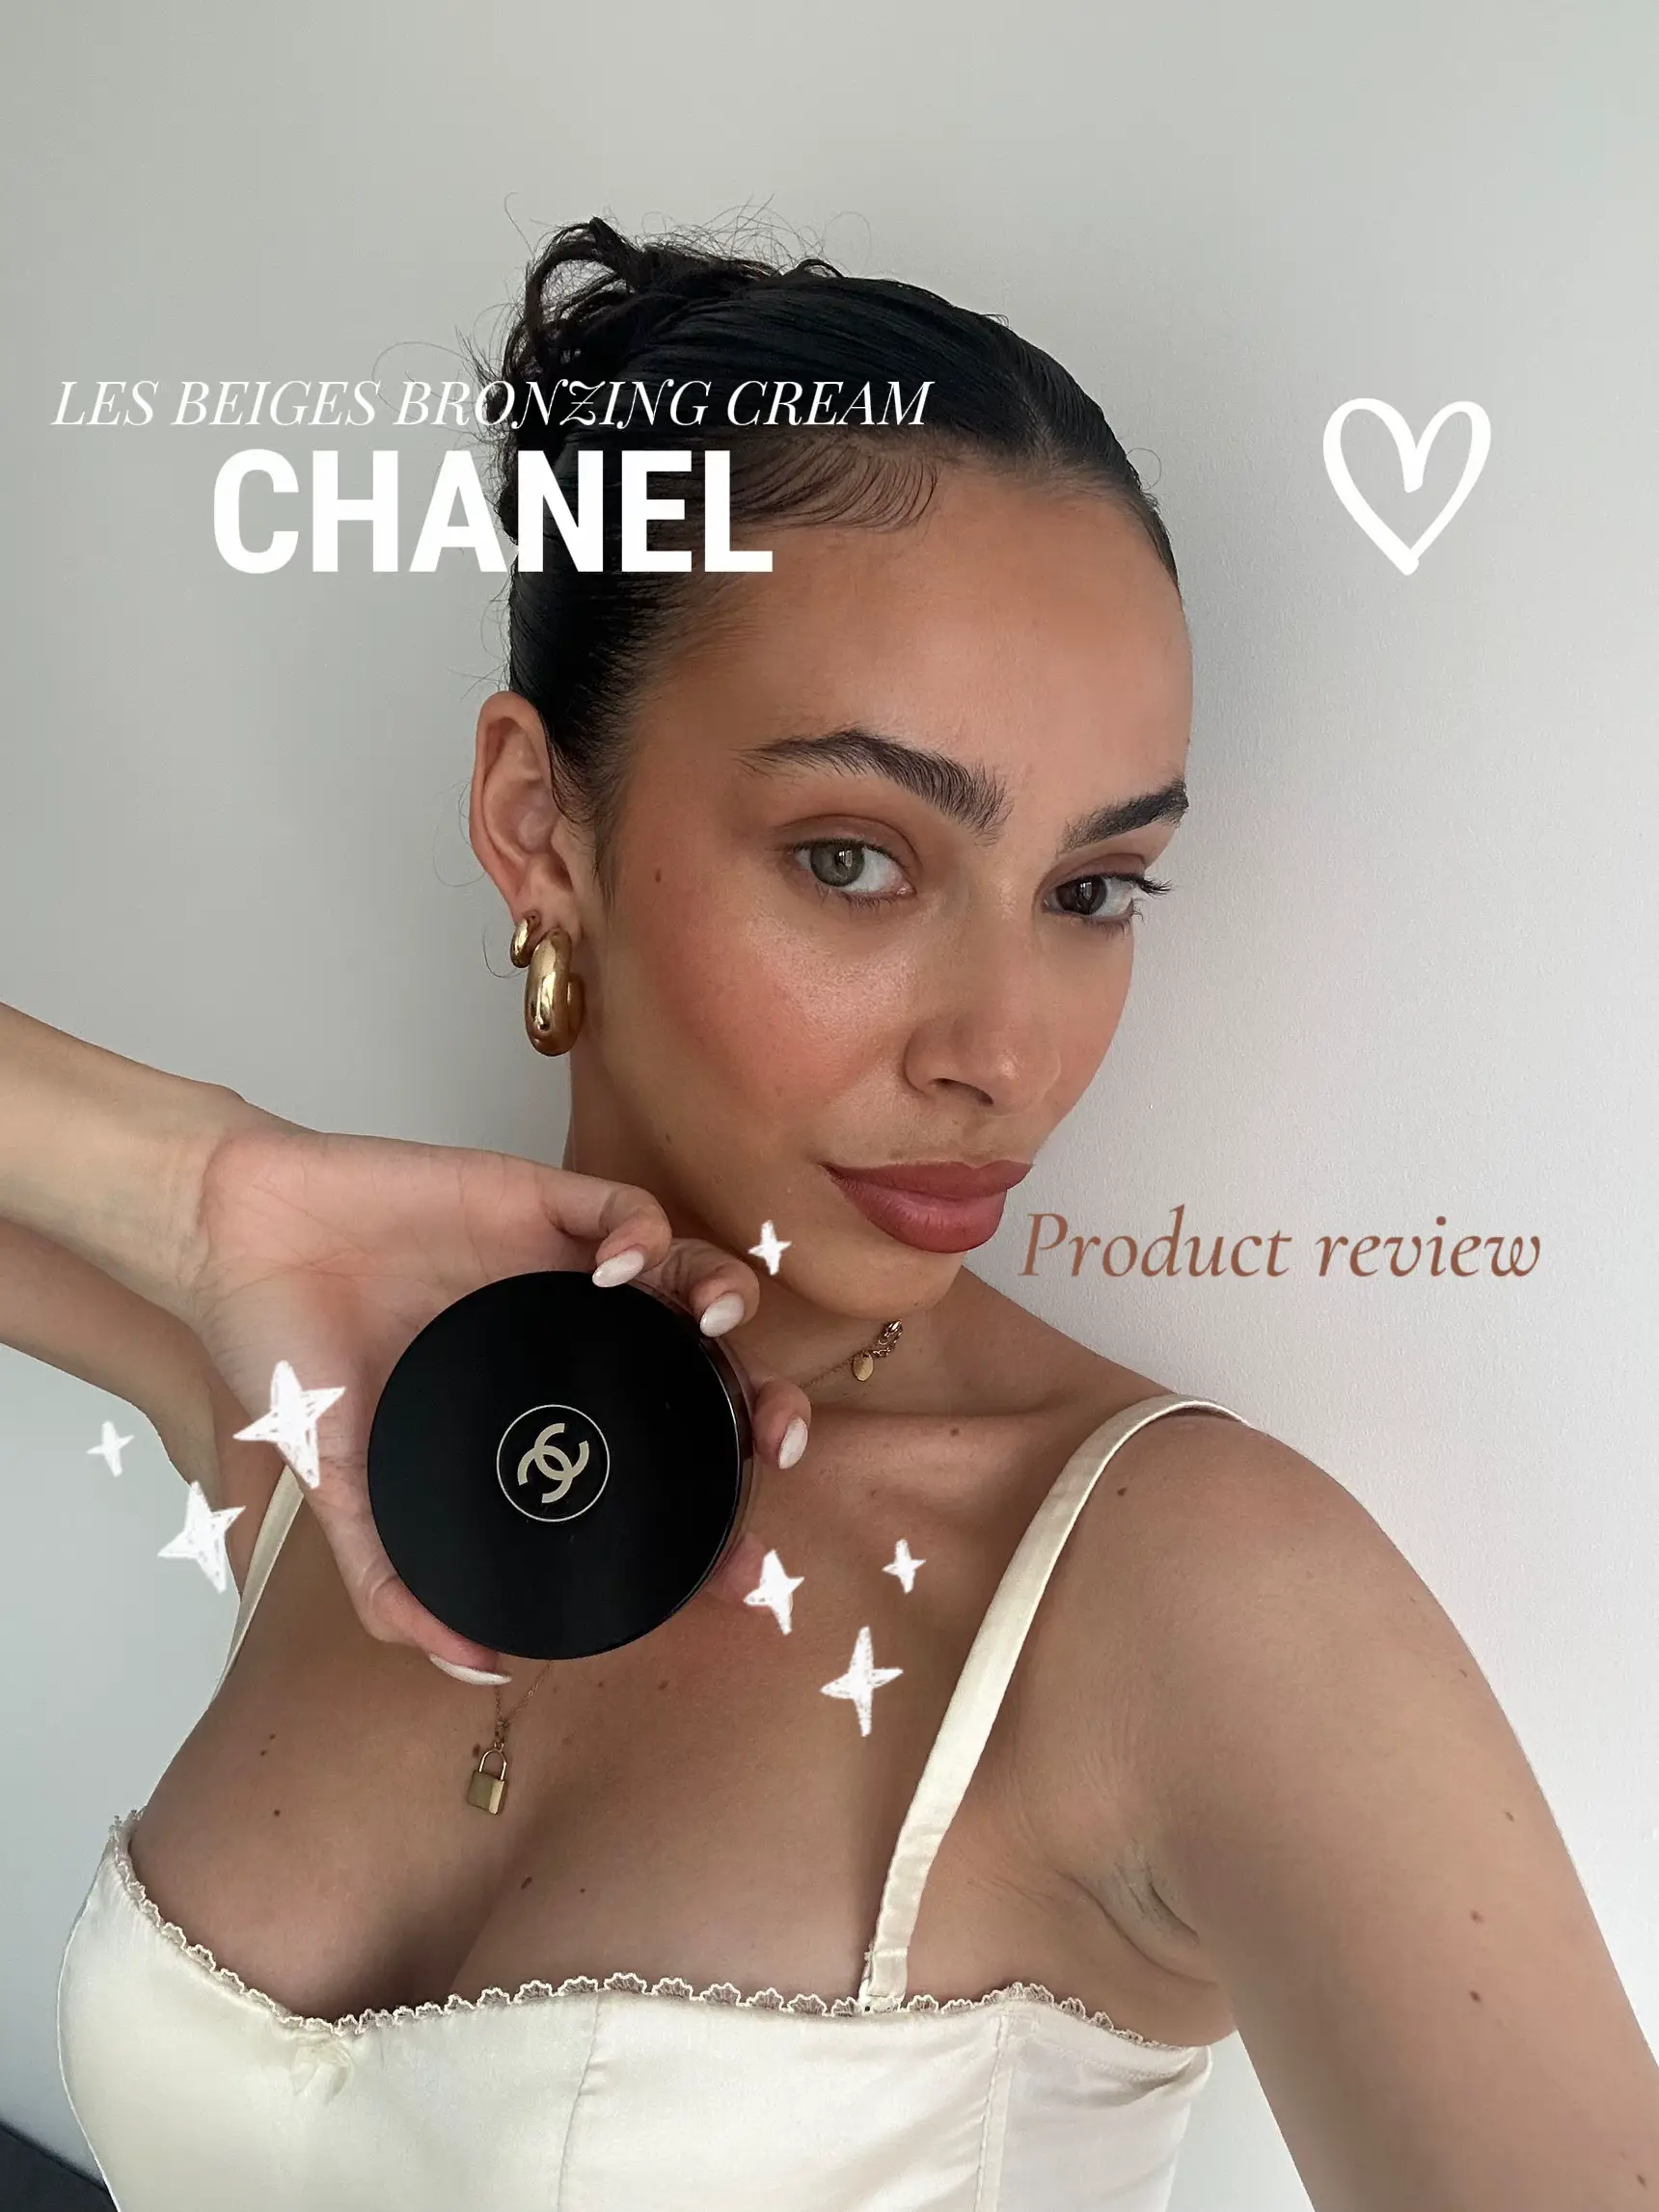 CHANEL Les Beiges Bronzing Cream Review, Gallery posted by Sarai Lewis